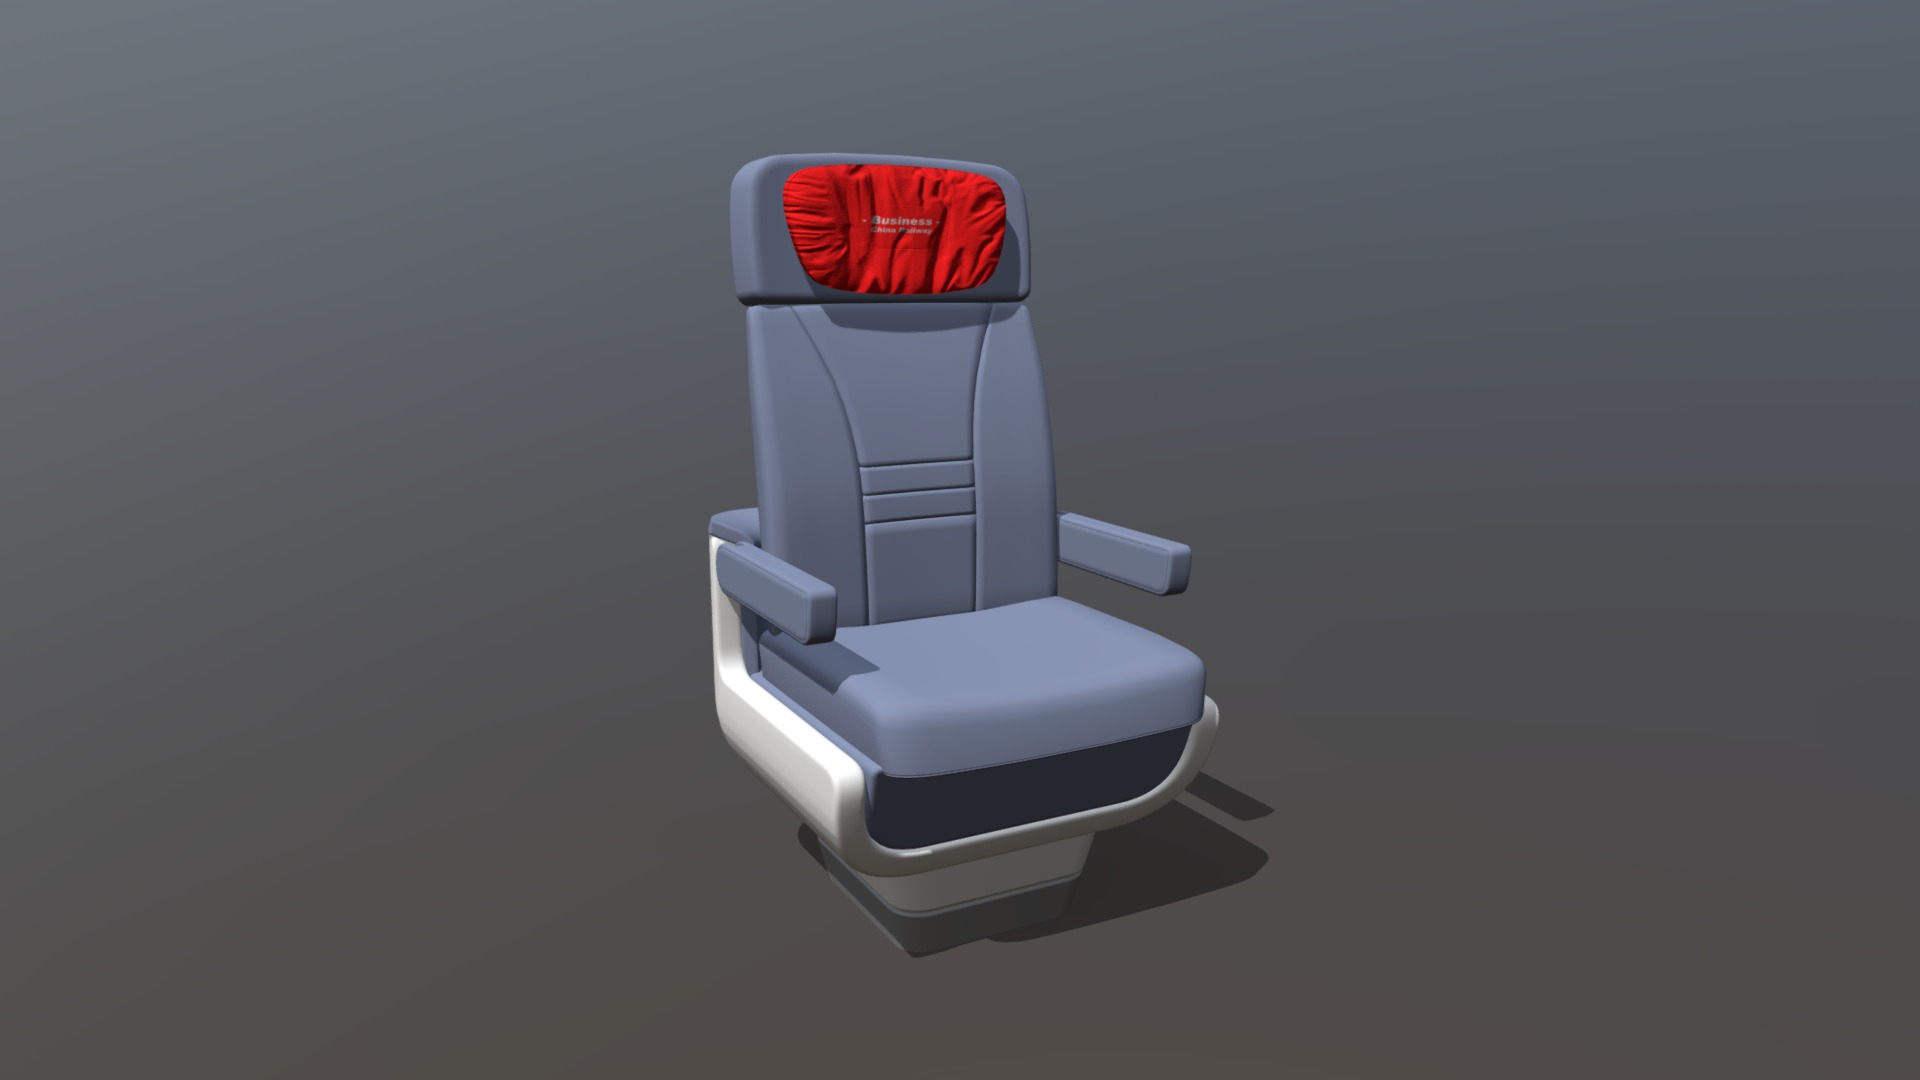 3D model Railway High Speed Railway Seats 010 - This is a 3D model of the Railway High Speed Railway Seats 010. The 3D model is about a white chair with a red basket.